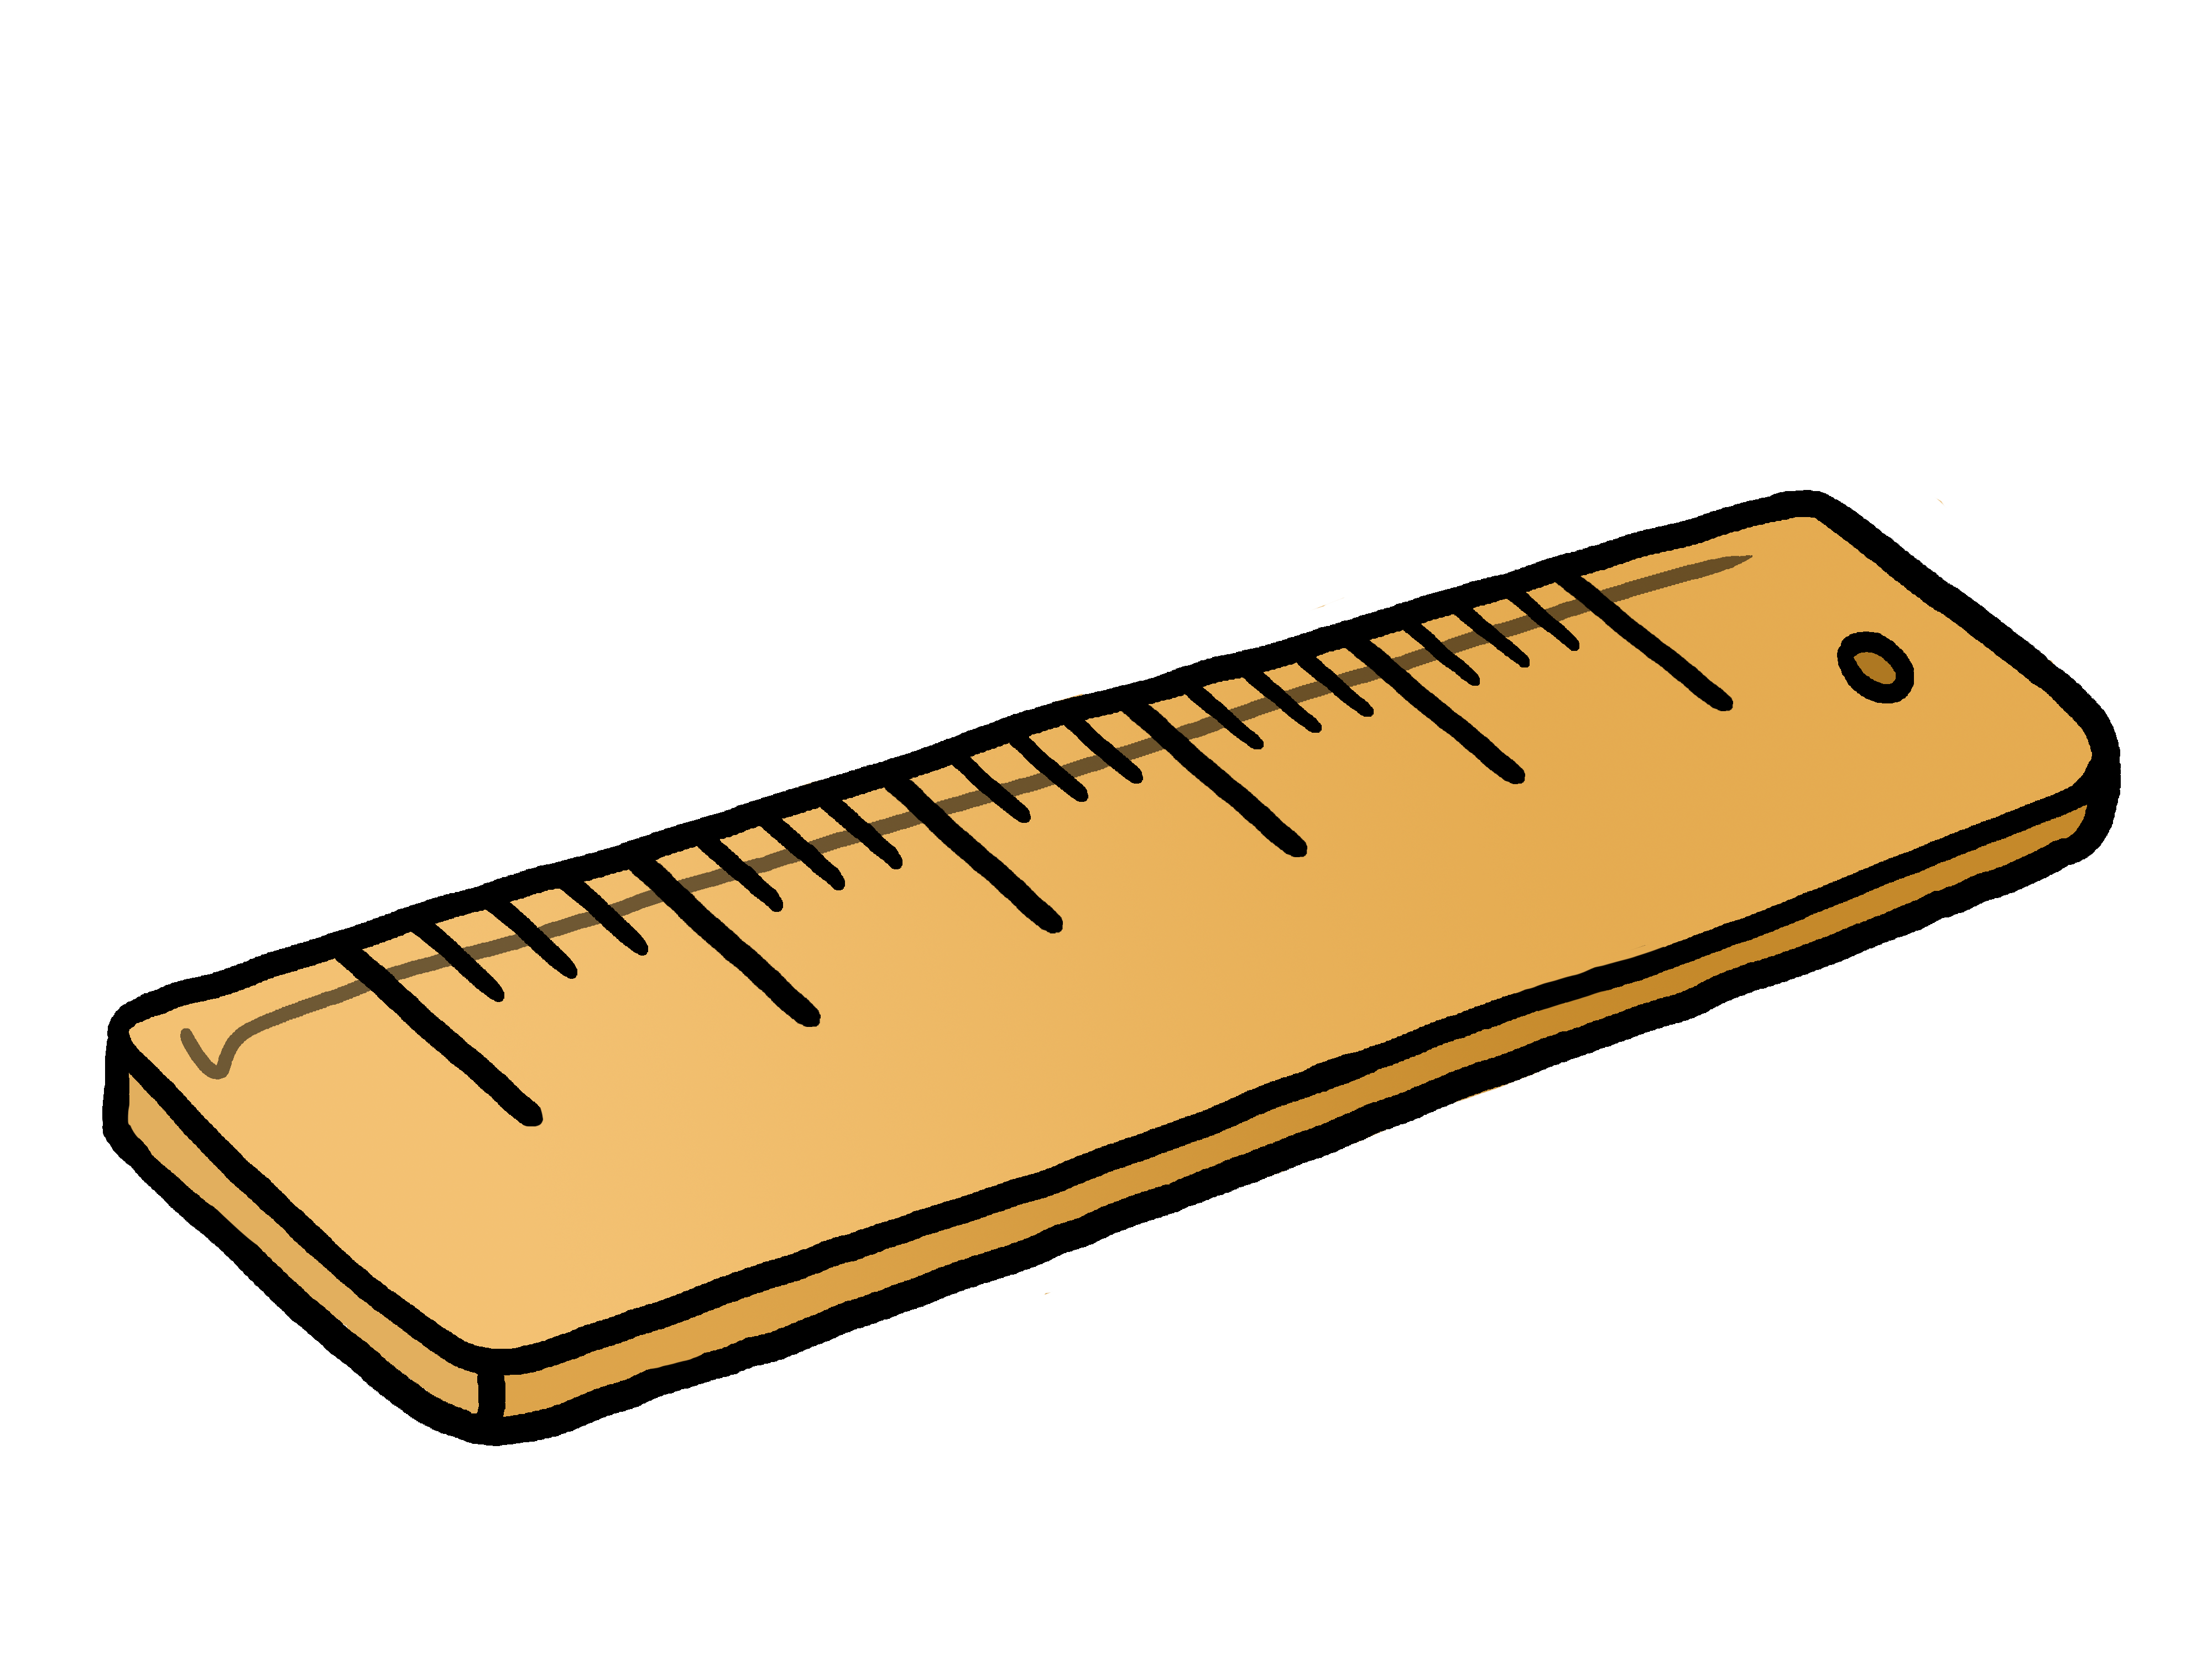 12 Inch Ruler Clipart | Clipart library - Free Clipart Images